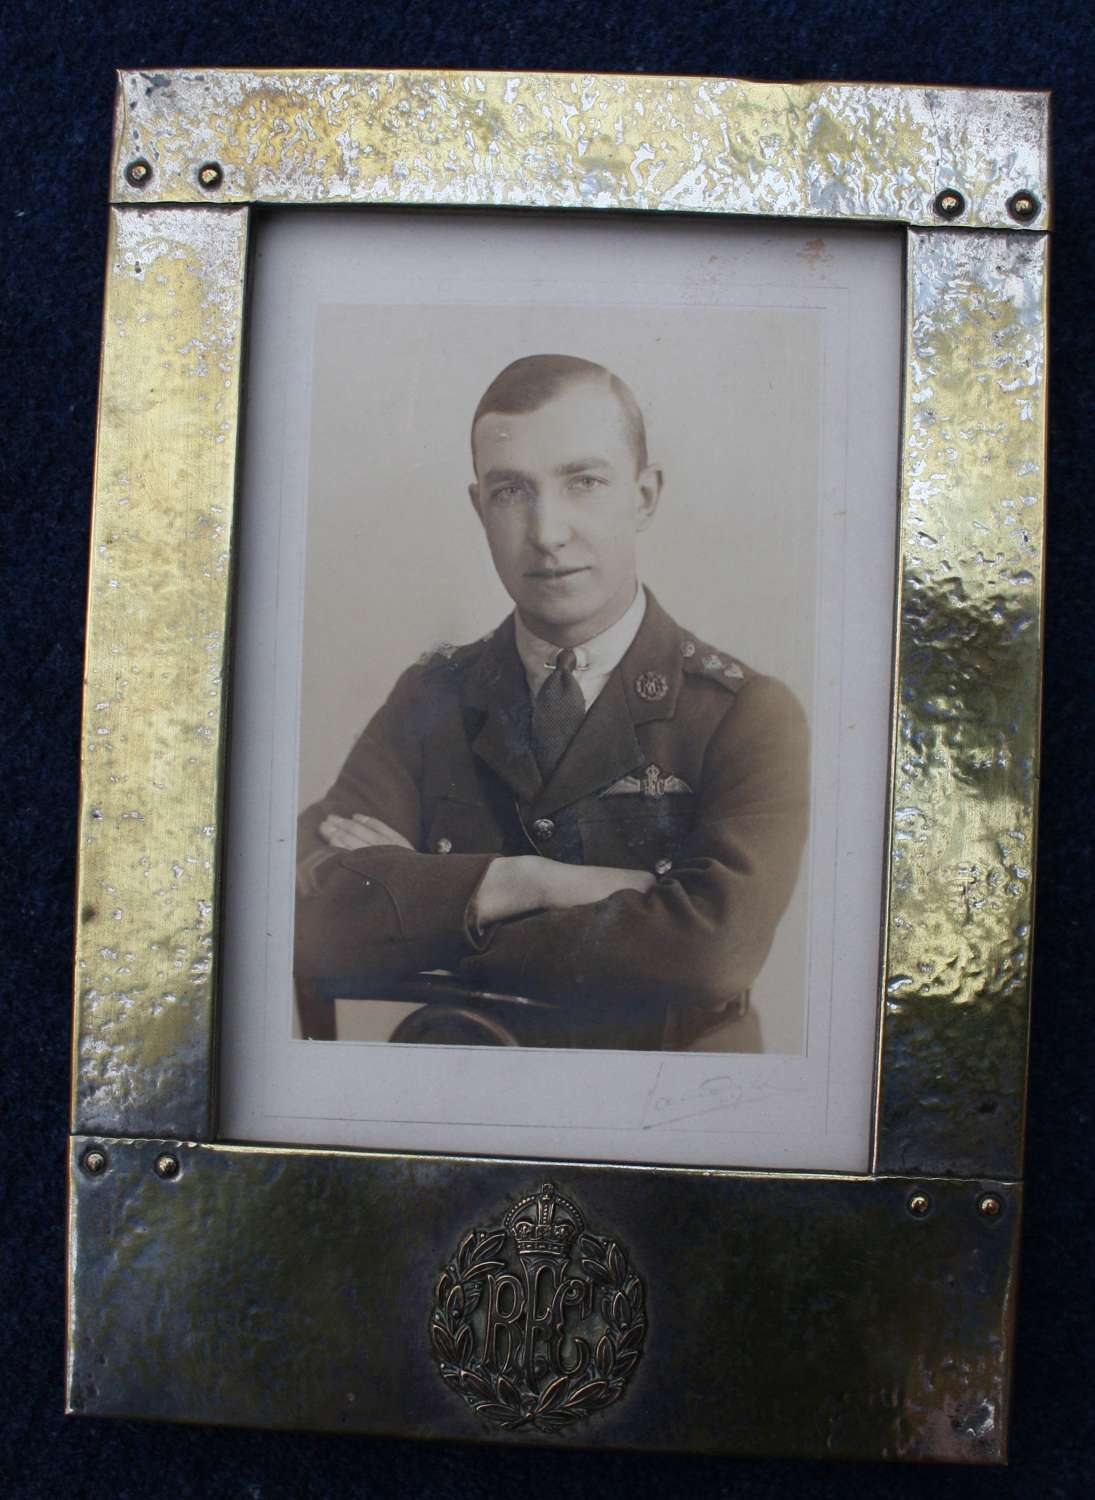 WW1 Brass Royal Flying Corps Photograph Frame Complete with Photo